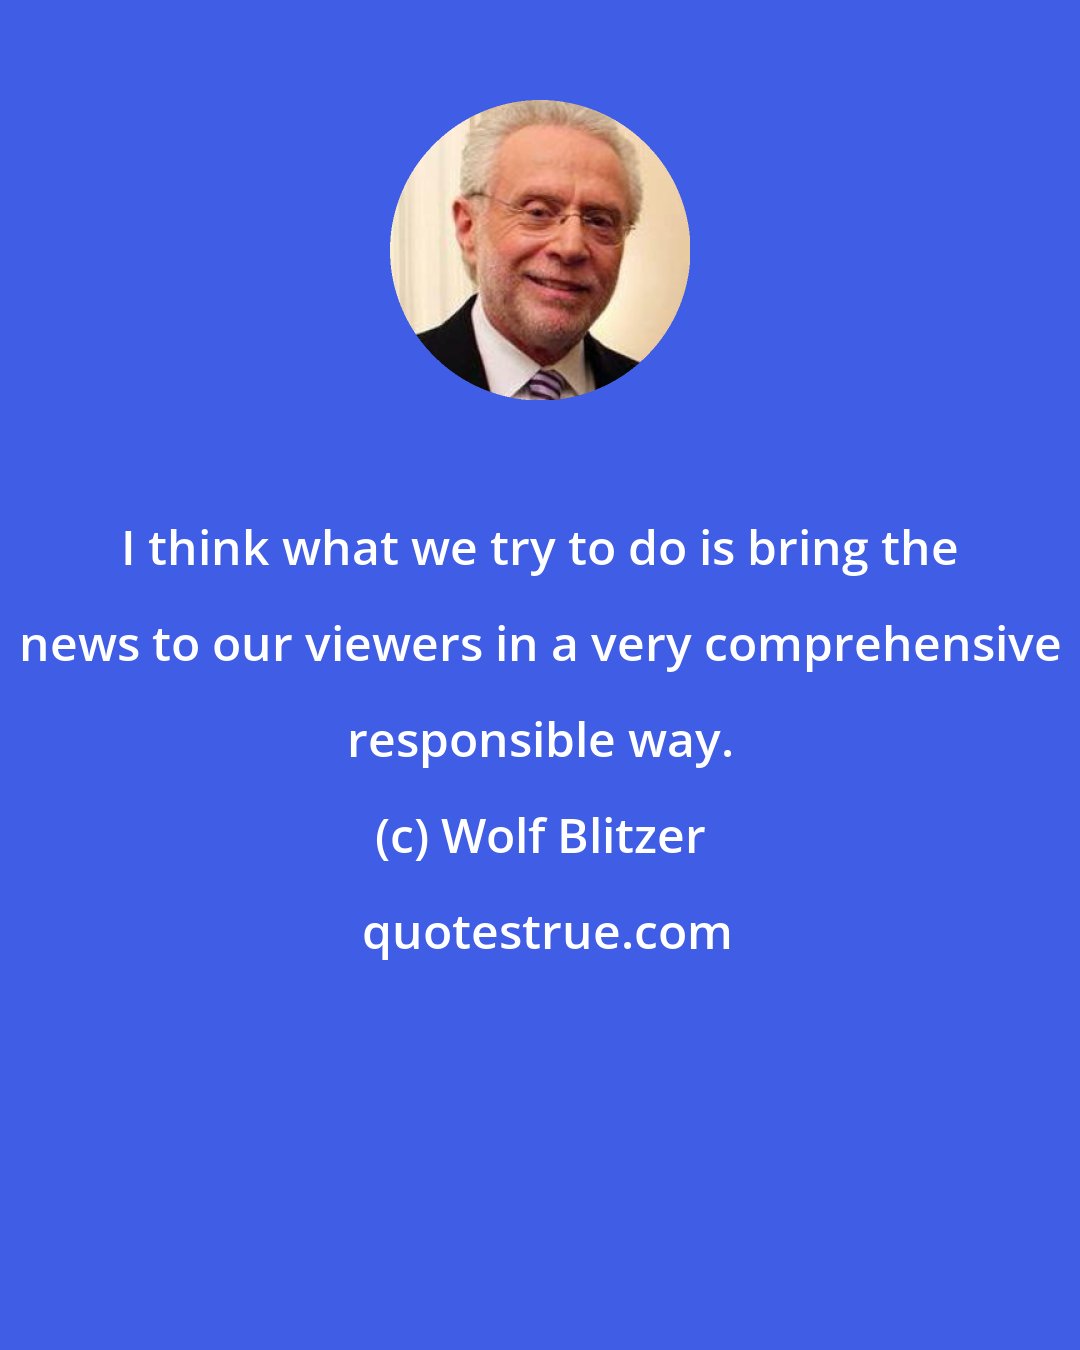 Wolf Blitzer: I think what we try to do is bring the news to our viewers in a very comprehensive responsible way.